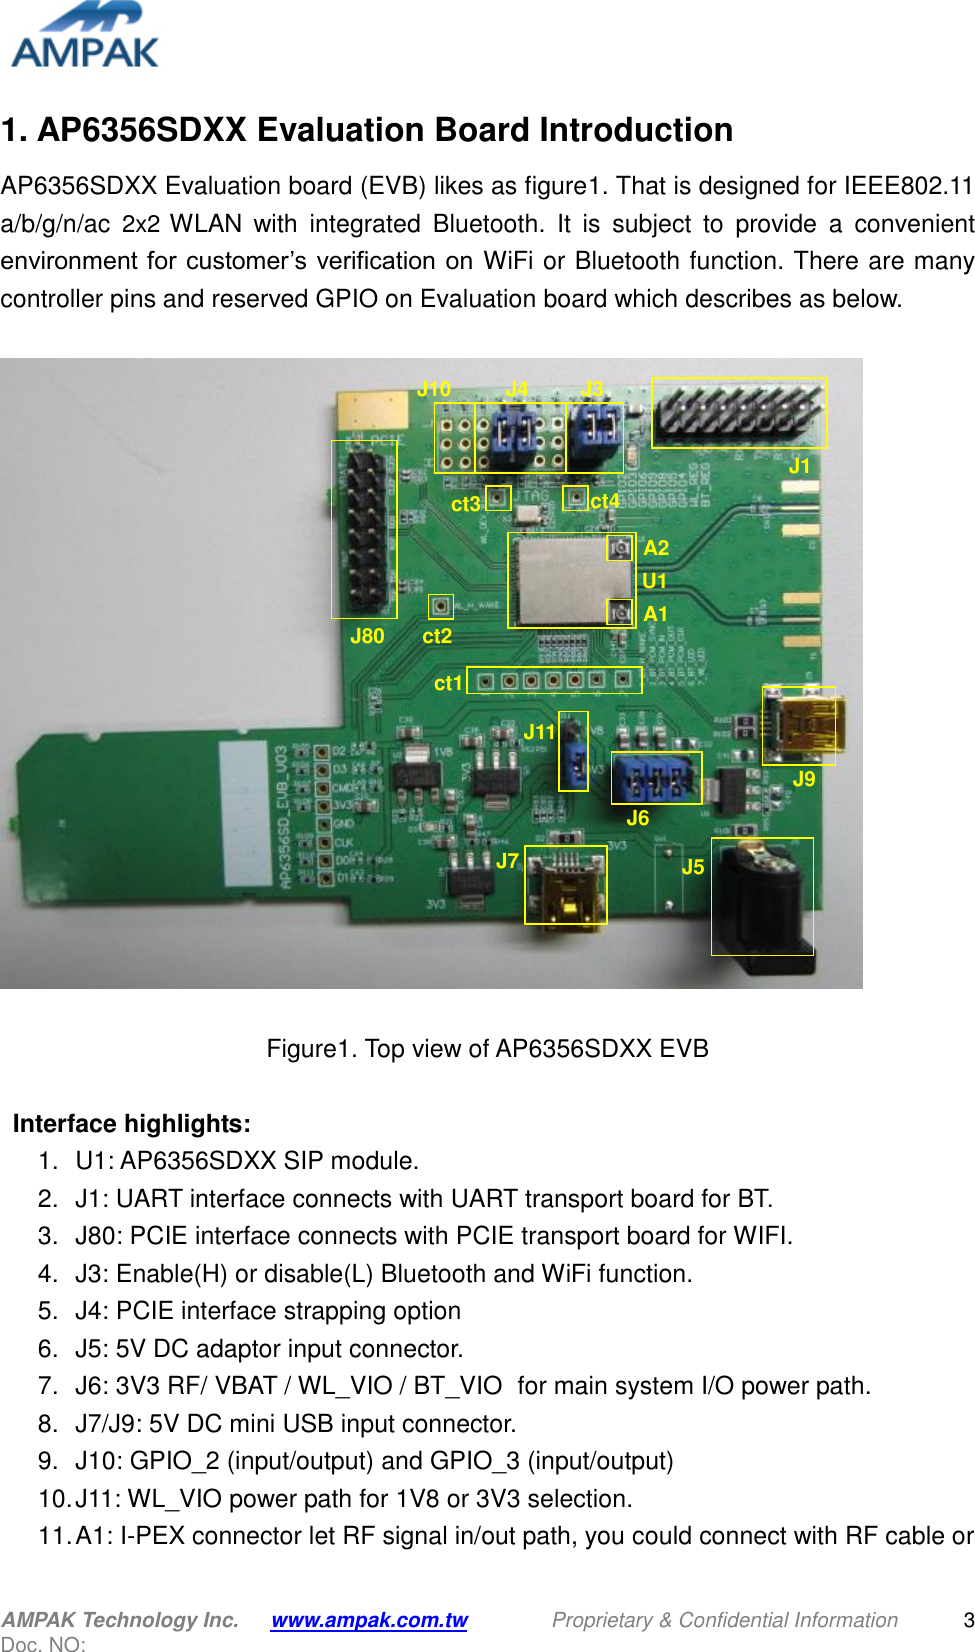  AMPAK Technology Inc.   www.ampak.com.tw                Proprietary &amp; Confidential Information   Doc. NO:   3 1. AP6356SDXX Evaluation Board Introduction AP6356SDXX Evaluation board (EVB) likes as figure1. That is designed for IEEE802.11 a/b/g/n/ac  2x2 WLAN  with  integrated  Bluetooth.  It  is  subject  to  provide  a  convenient environment  for  customer’s verification  on WiFi or Bluetooth function. There are many controller pins and reserved GPIO on Evaluation board which describes as below.    Figure1. Top view of AP6356SDXX EVB    Interface highlights: 1.  U1: AP6356SDXX SIP module. 2.  J1: UART interface connects with UART transport board for BT. 3.  J80: PCIE interface connects with PCIE transport board for WIFI. 4.  J3: Enable(H) or disable(L) Bluetooth and WiFi function. 5.  J4: PCIE interface strapping option   6.  J5: 5V DC adaptor input connector. 7.  J6: 3V3 RF/ VBAT / WL_VIO / BT_VIO   for main system I/O power path. 8.  J7/J9: 5V DC mini USB input connector. 9.  J10: GPIO_2 (input/output) and GPIO_3 (input/output) 10. J11: WL_VIO power path for 1V8 or 3V3 selection. 11. A1: I-PEX connector let RF signal in/out path, you could connect with RF cable or                     J10 J4 J3 J1 A2 U1 A1 J80 ct2 ct3 ct4 J7 J5 J9 J11 J6 ct1 